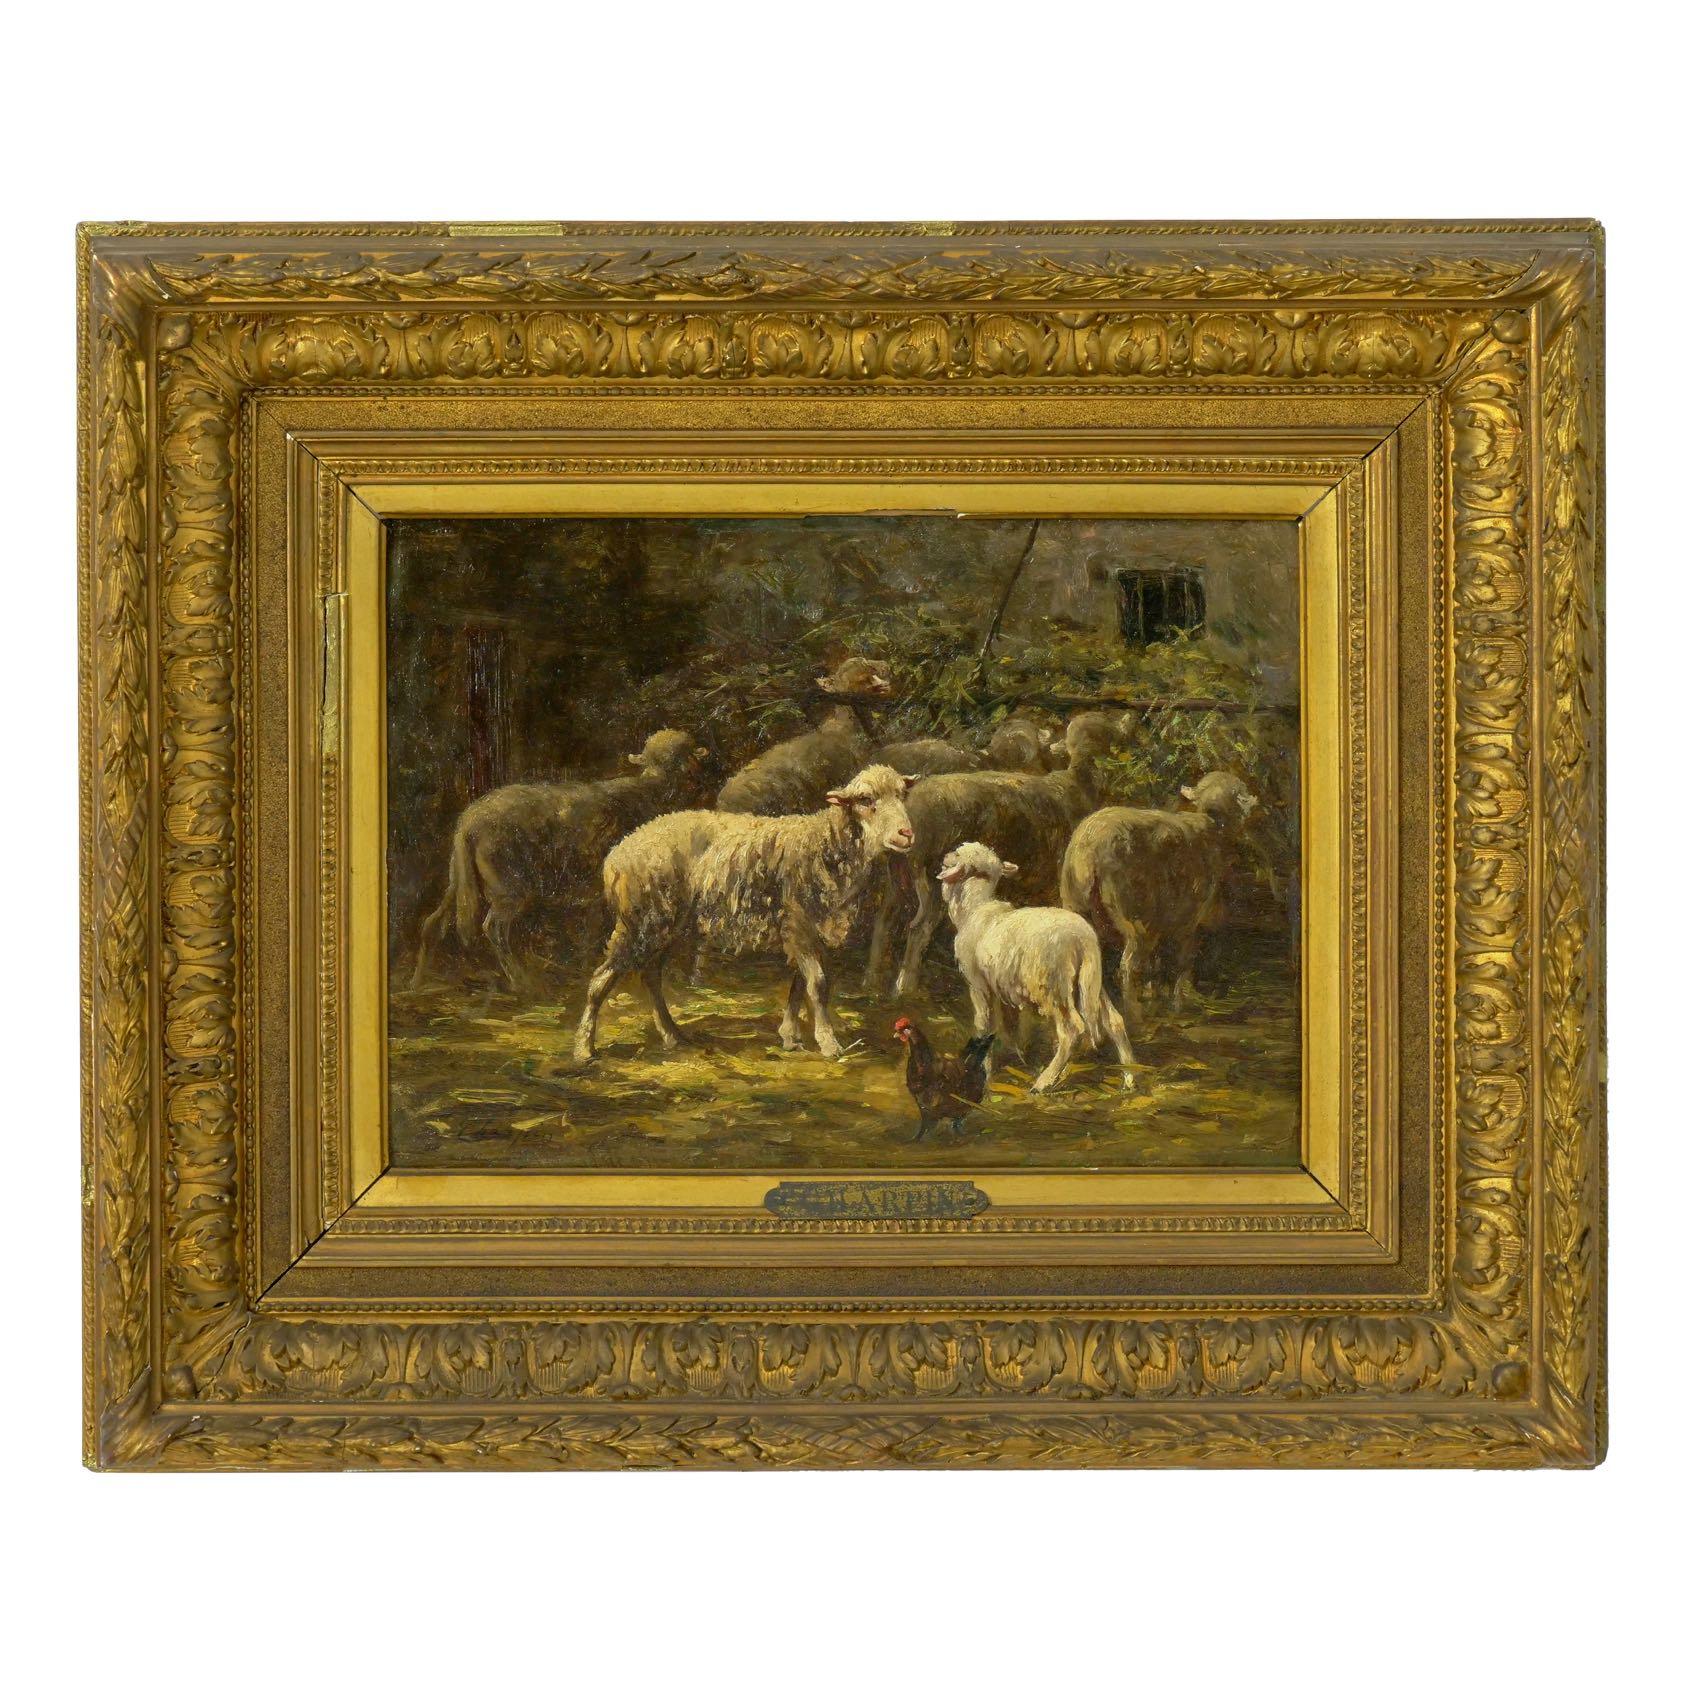 As a well-known member of the Barbizon School and student of Charles-François Daubigny, Albert Charpin's paintings were faithful in their representation of what is rather than idealizing what nature could be. The present example is an interesting